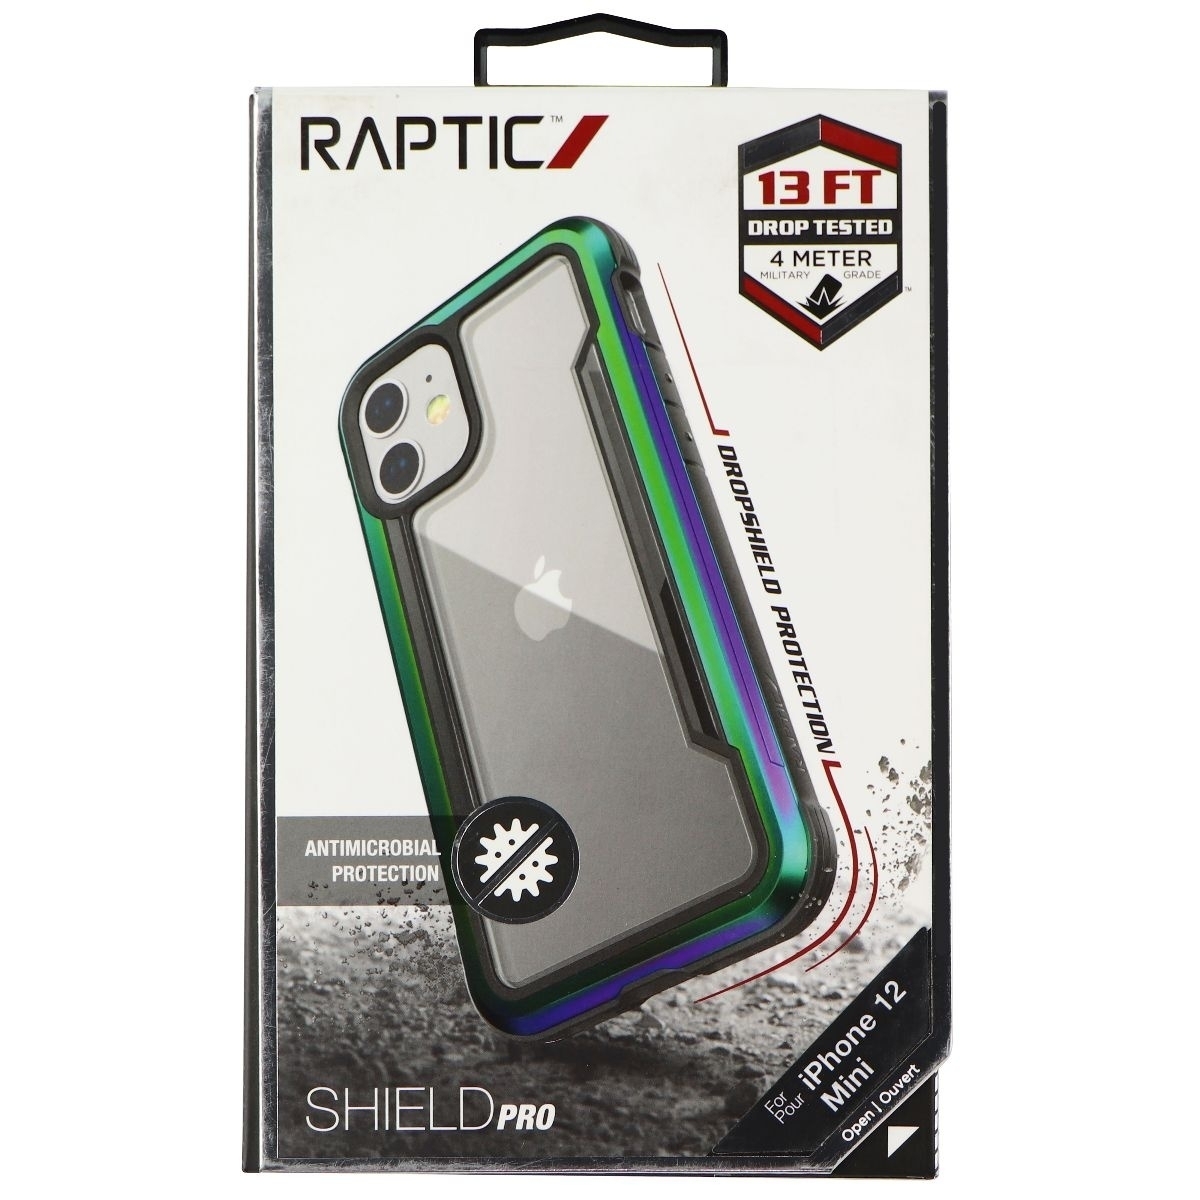 Raptic Shield Pro Series Case For Apple IPhone 12 Mini - Iridescent/Clear